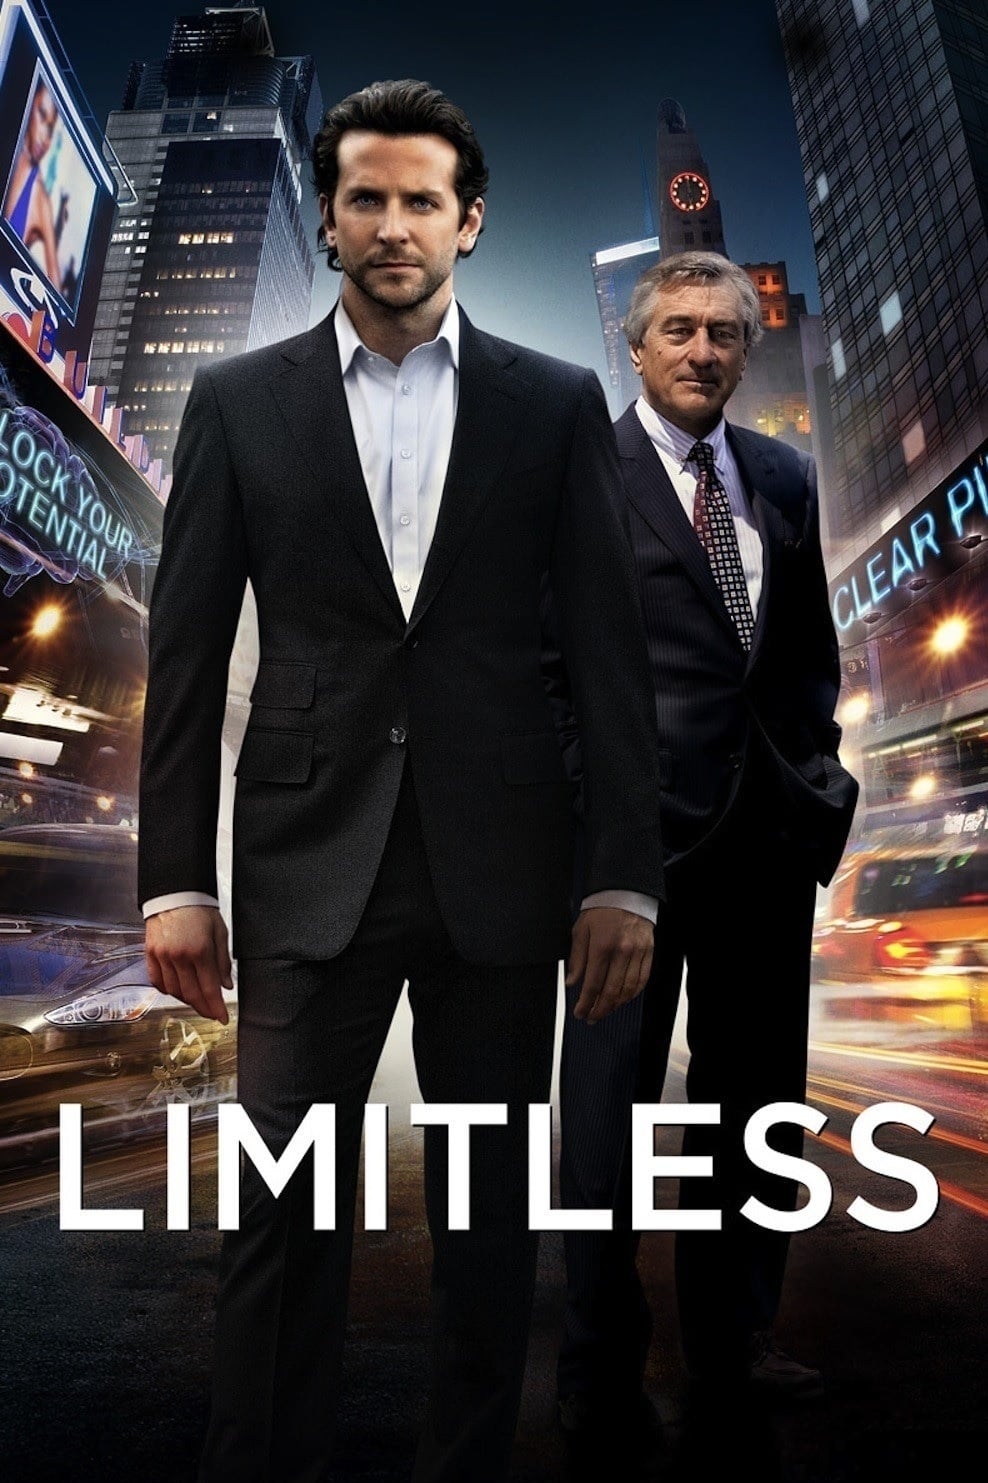 Sin Limites (2011) UNRATED Full HD 1080p Latino